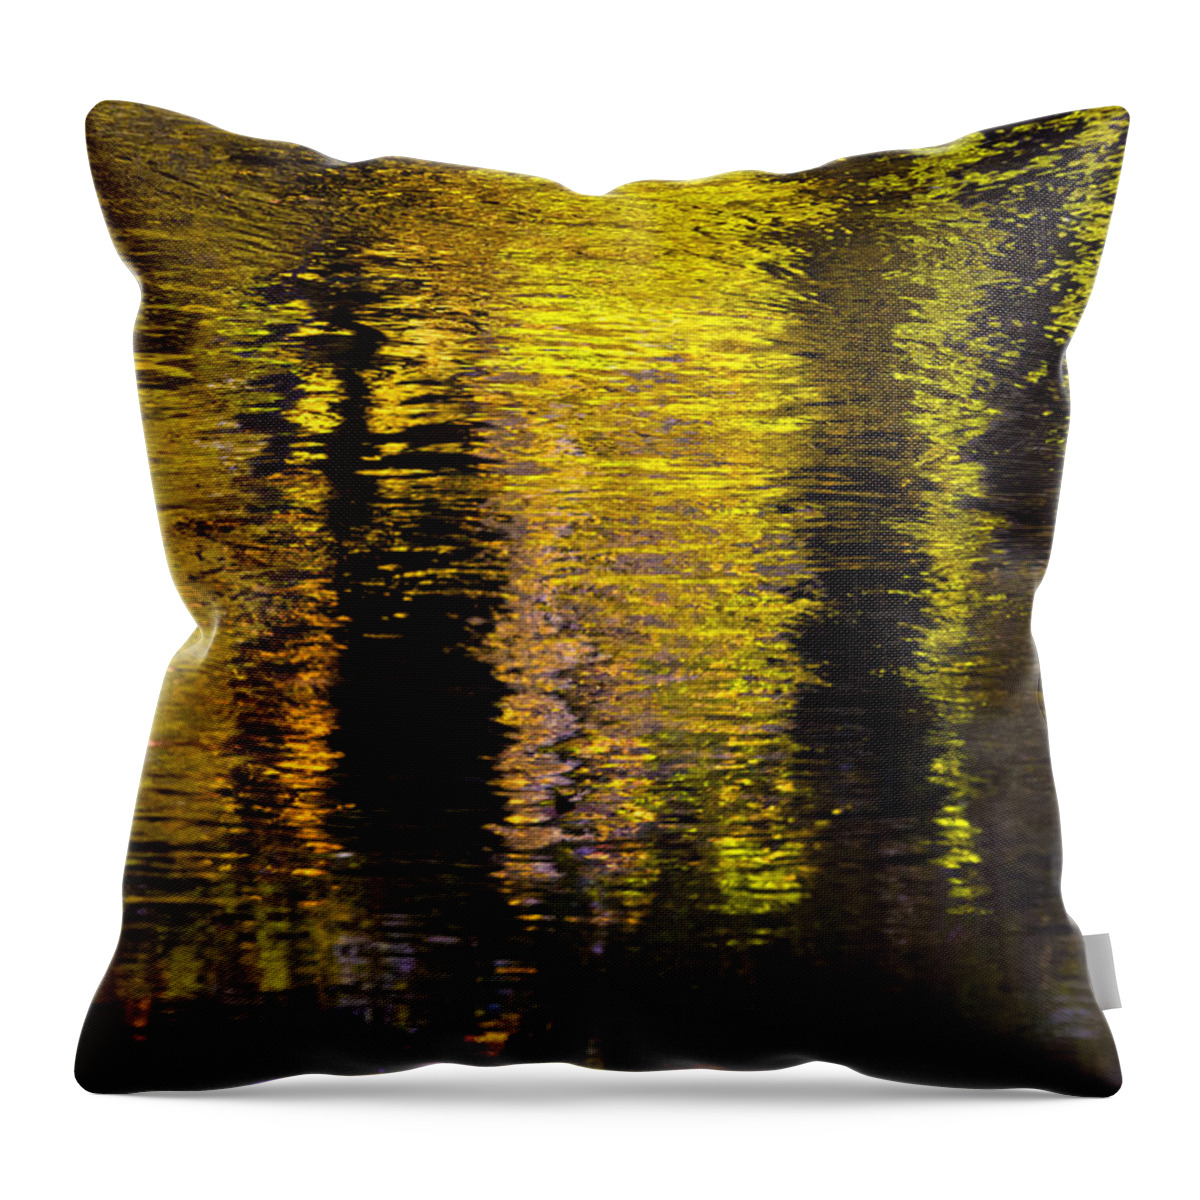 Colored Reflections Throw Pillow featuring the photograph Colored Reflections by Ken Barrett